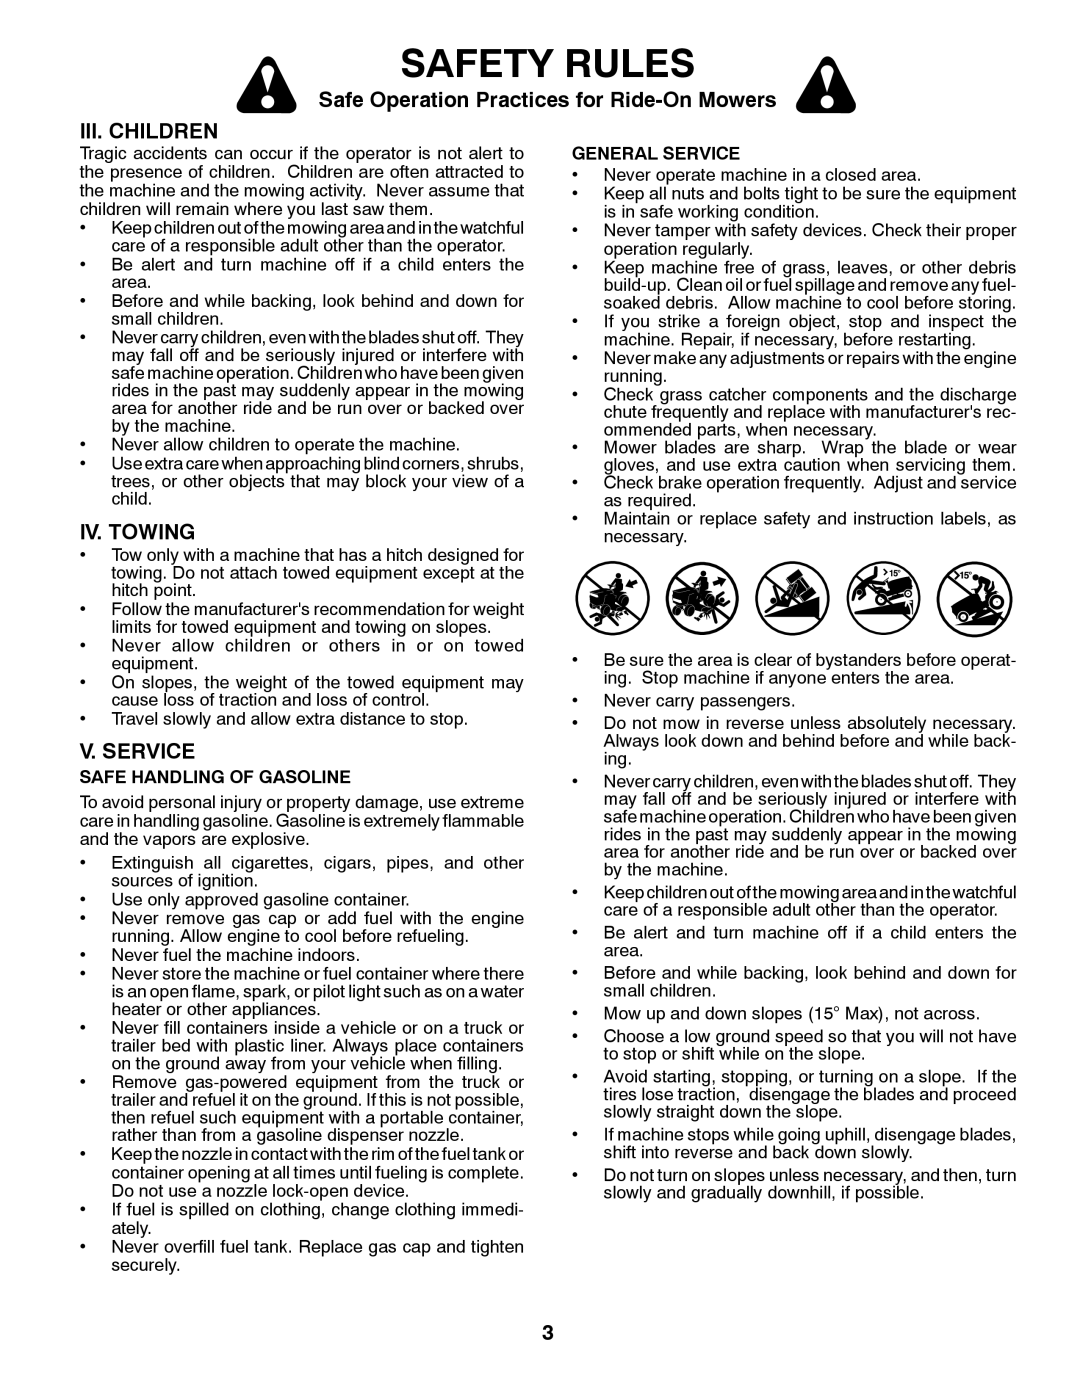 Husqvarna 532 43 86-44 Iii. Children, Iv. Towing, V. Service, Safety Rules, Safe Operation Practices for Ride-On Mowers 